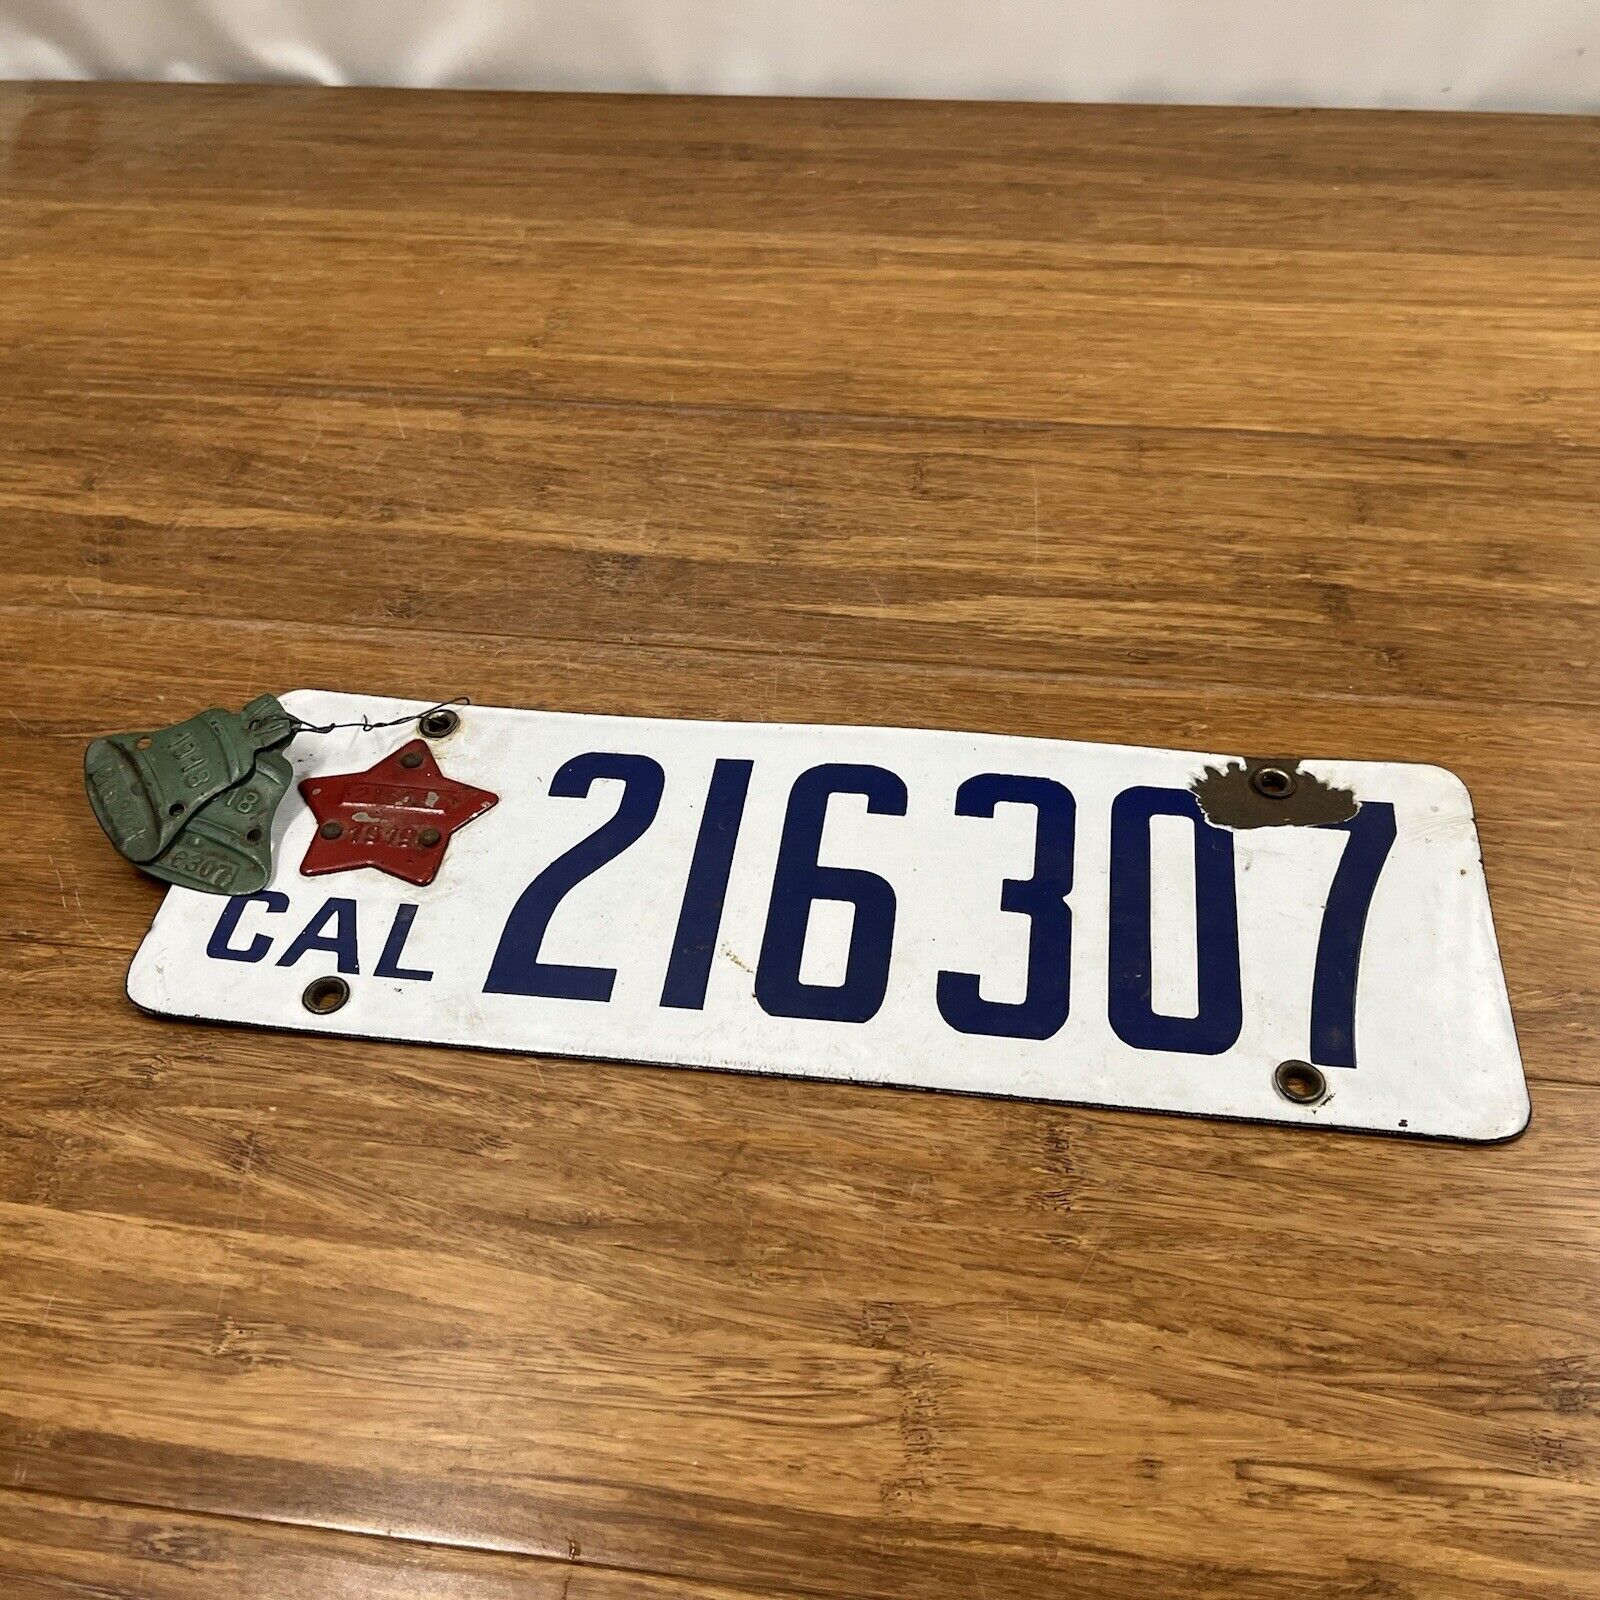 Rare 1916 California License Plate W/ 1 Star & 2 Liberty Bell Tags See Good Cond